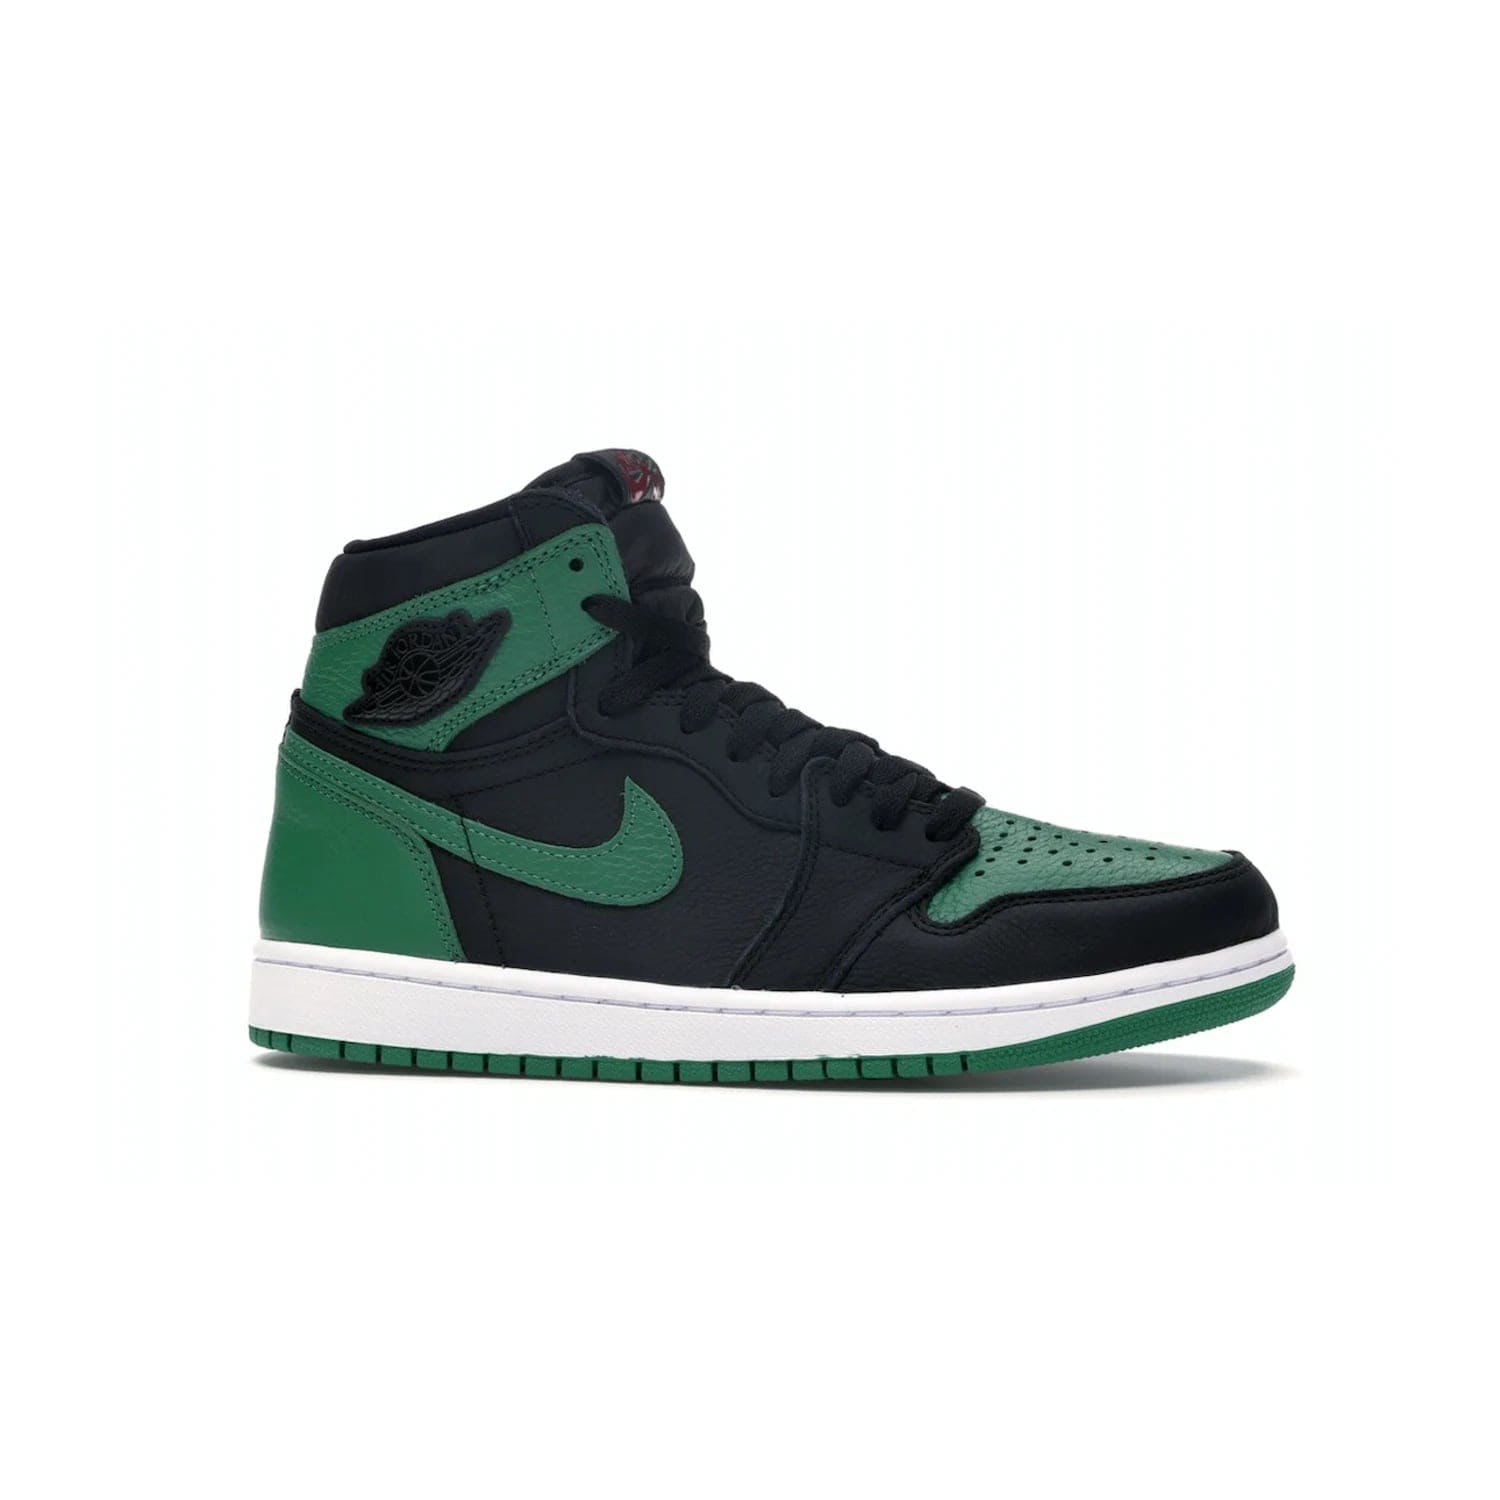 Jordan 1 Retro High Pine Green Black - Image 2 - Only at www.BallersClubKickz.com - Step into fresh style with the Jordan 1 Retro High Pine Green Black. Combining a black tumbled leather upper with green leather overlays, this sneaker features a Gym Red embroidered tongue tag, sail midsole, and pine green outsole for iconic style with a unique twist.